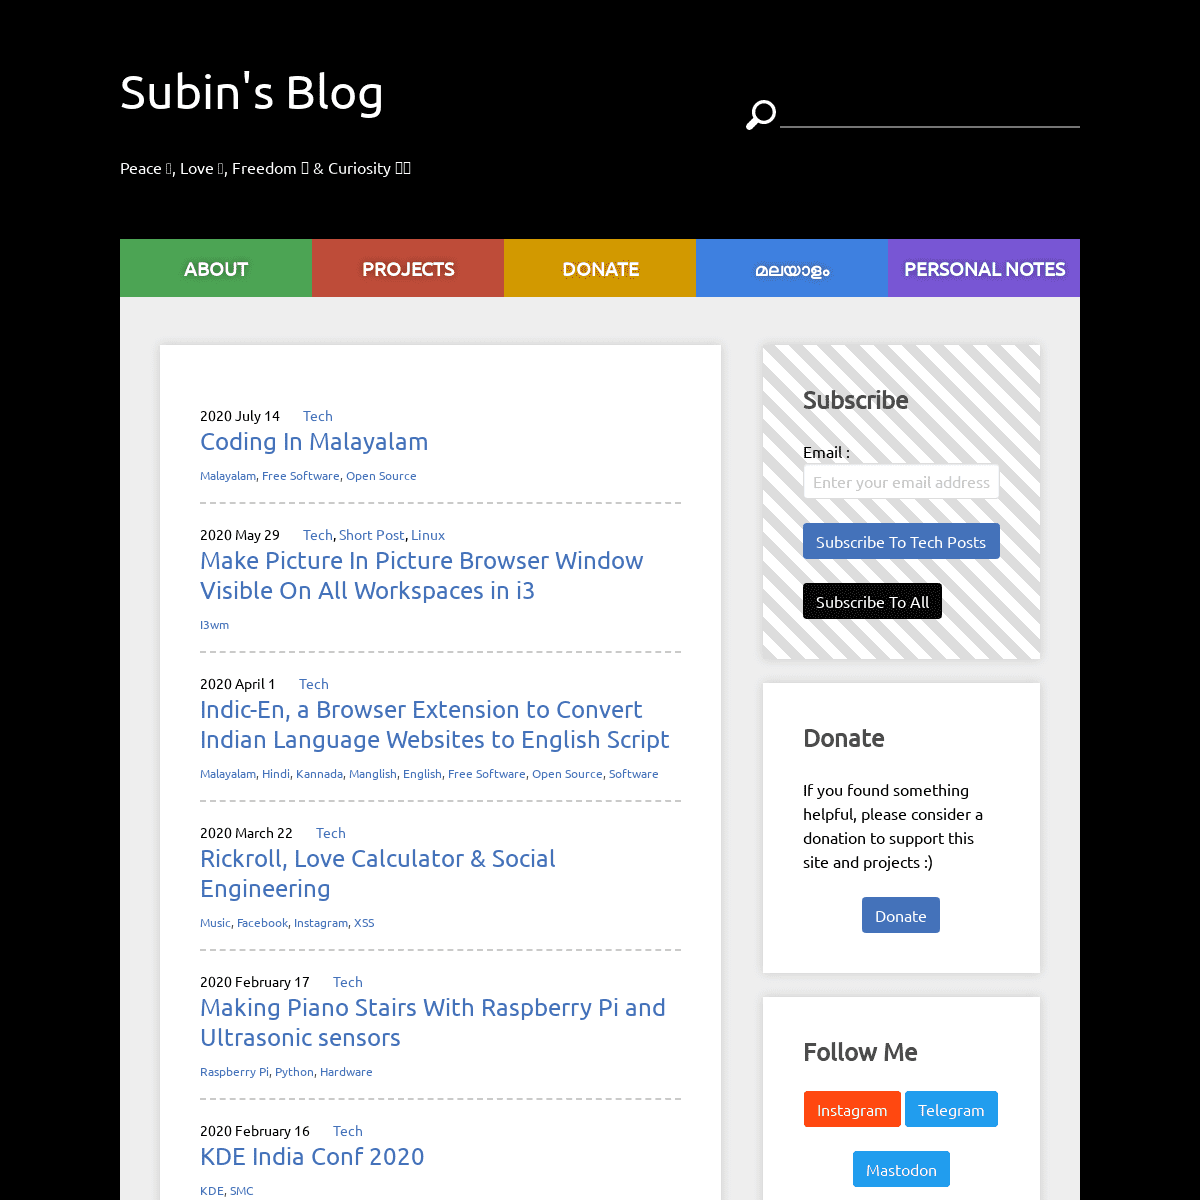 A complete backup of https://subinsb.com